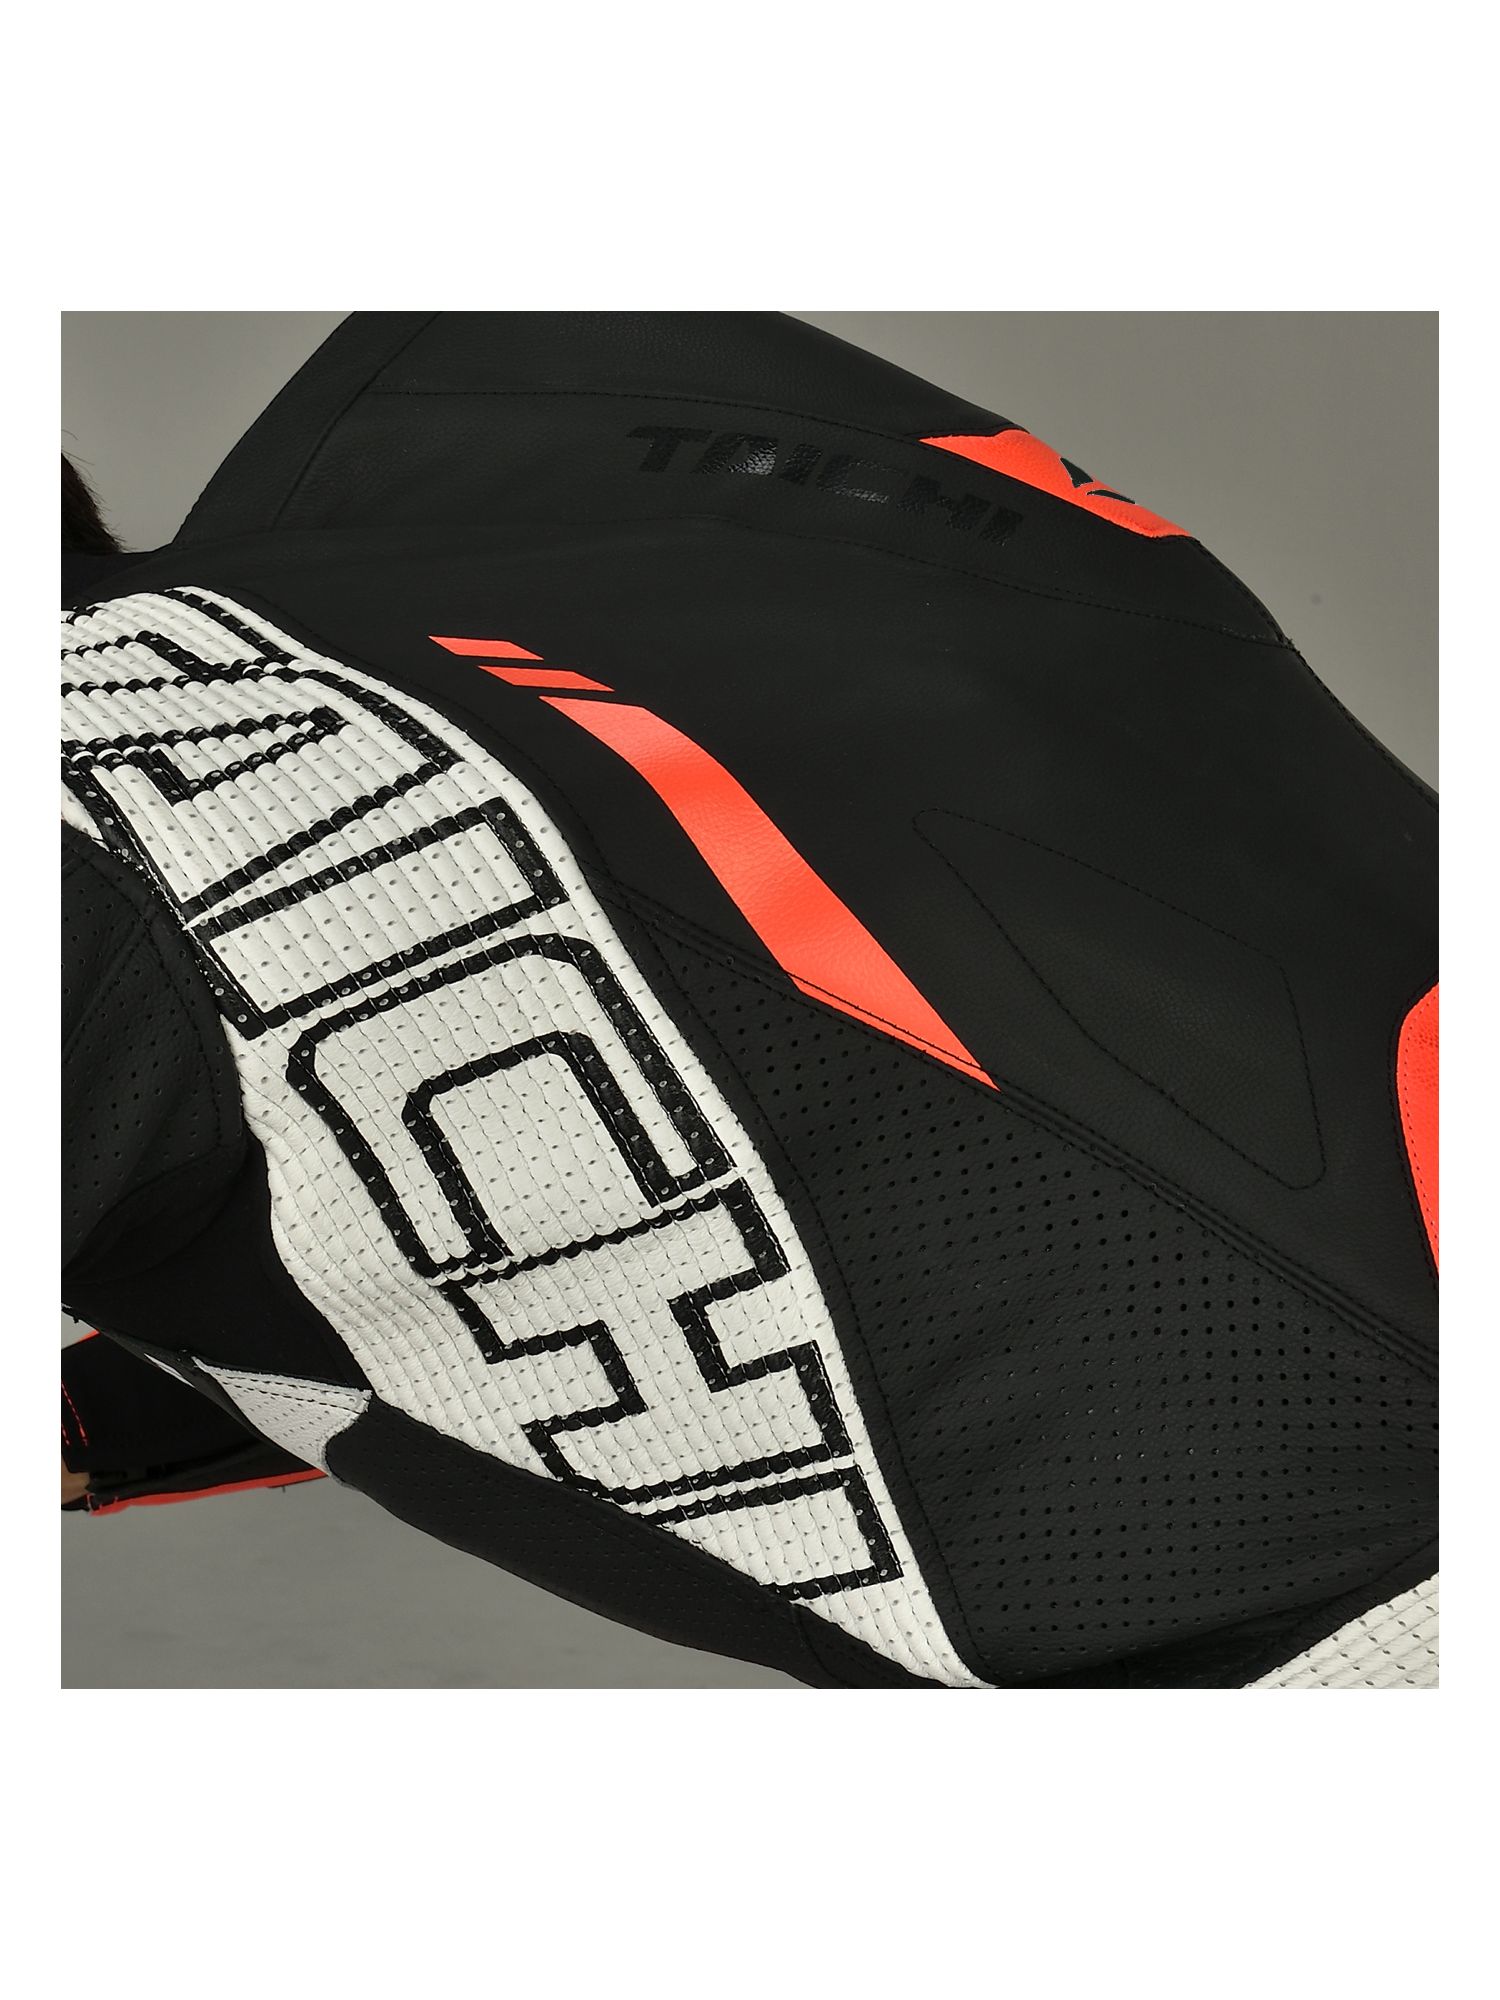 NXL306 | GP-WRX R306 RACING SUIT FOR TECH-AIR®［2colors］